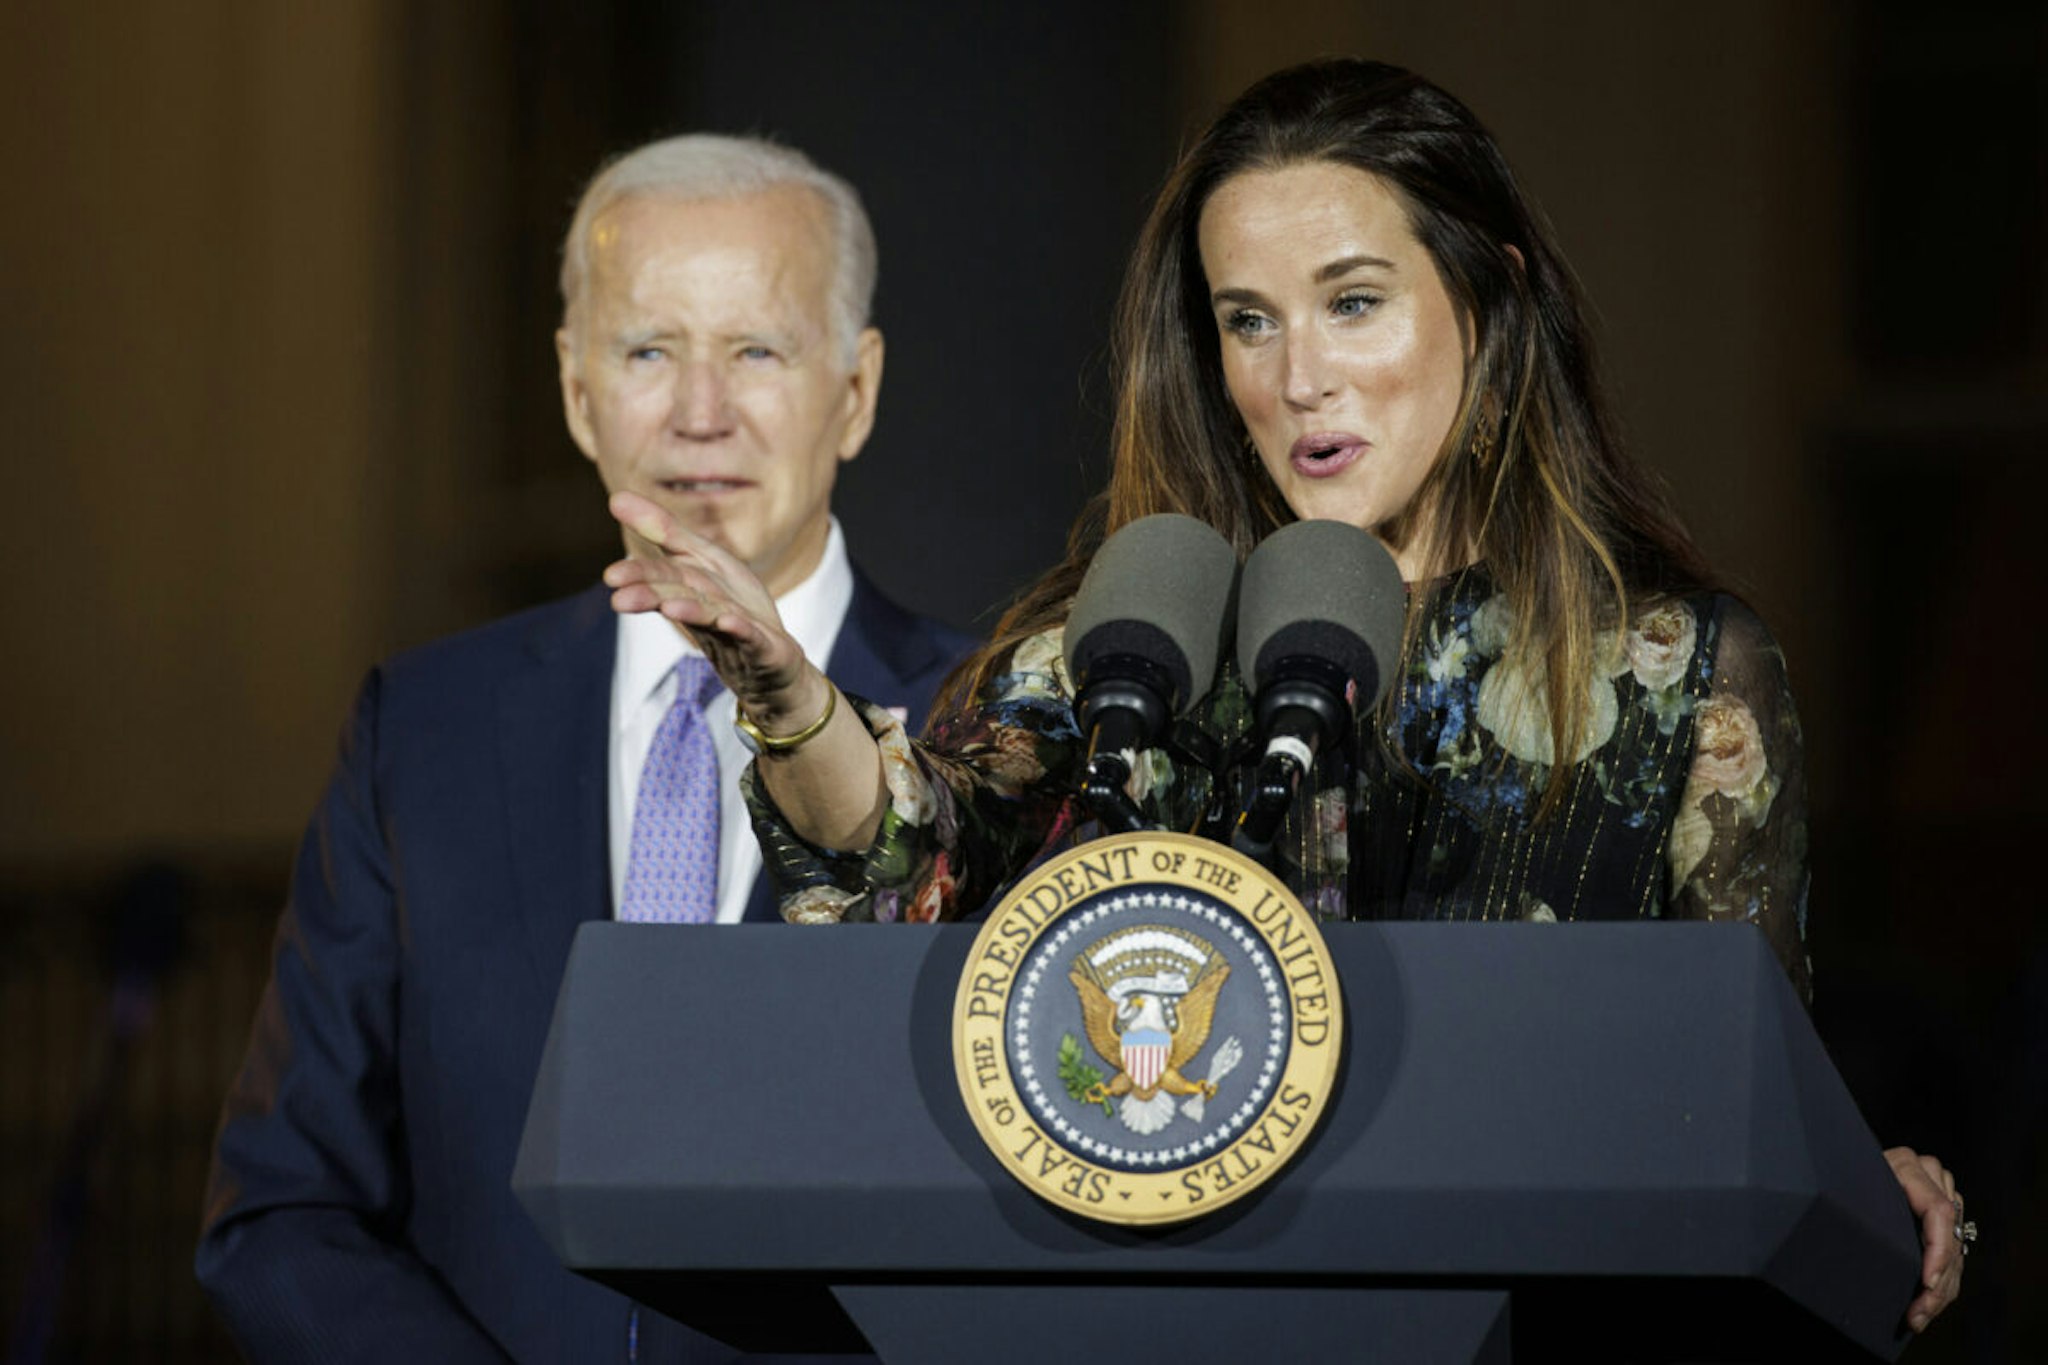 Ashley Biden speaks alongside her father US President Joe Biden during a Juneteenth concert on the South Lawn of the White House in Washington, DC, US, on Tuesday, June 13, 2023. In 2021, Biden signed legislation establishing Juneteenth as the nation's newest Federal holiday.